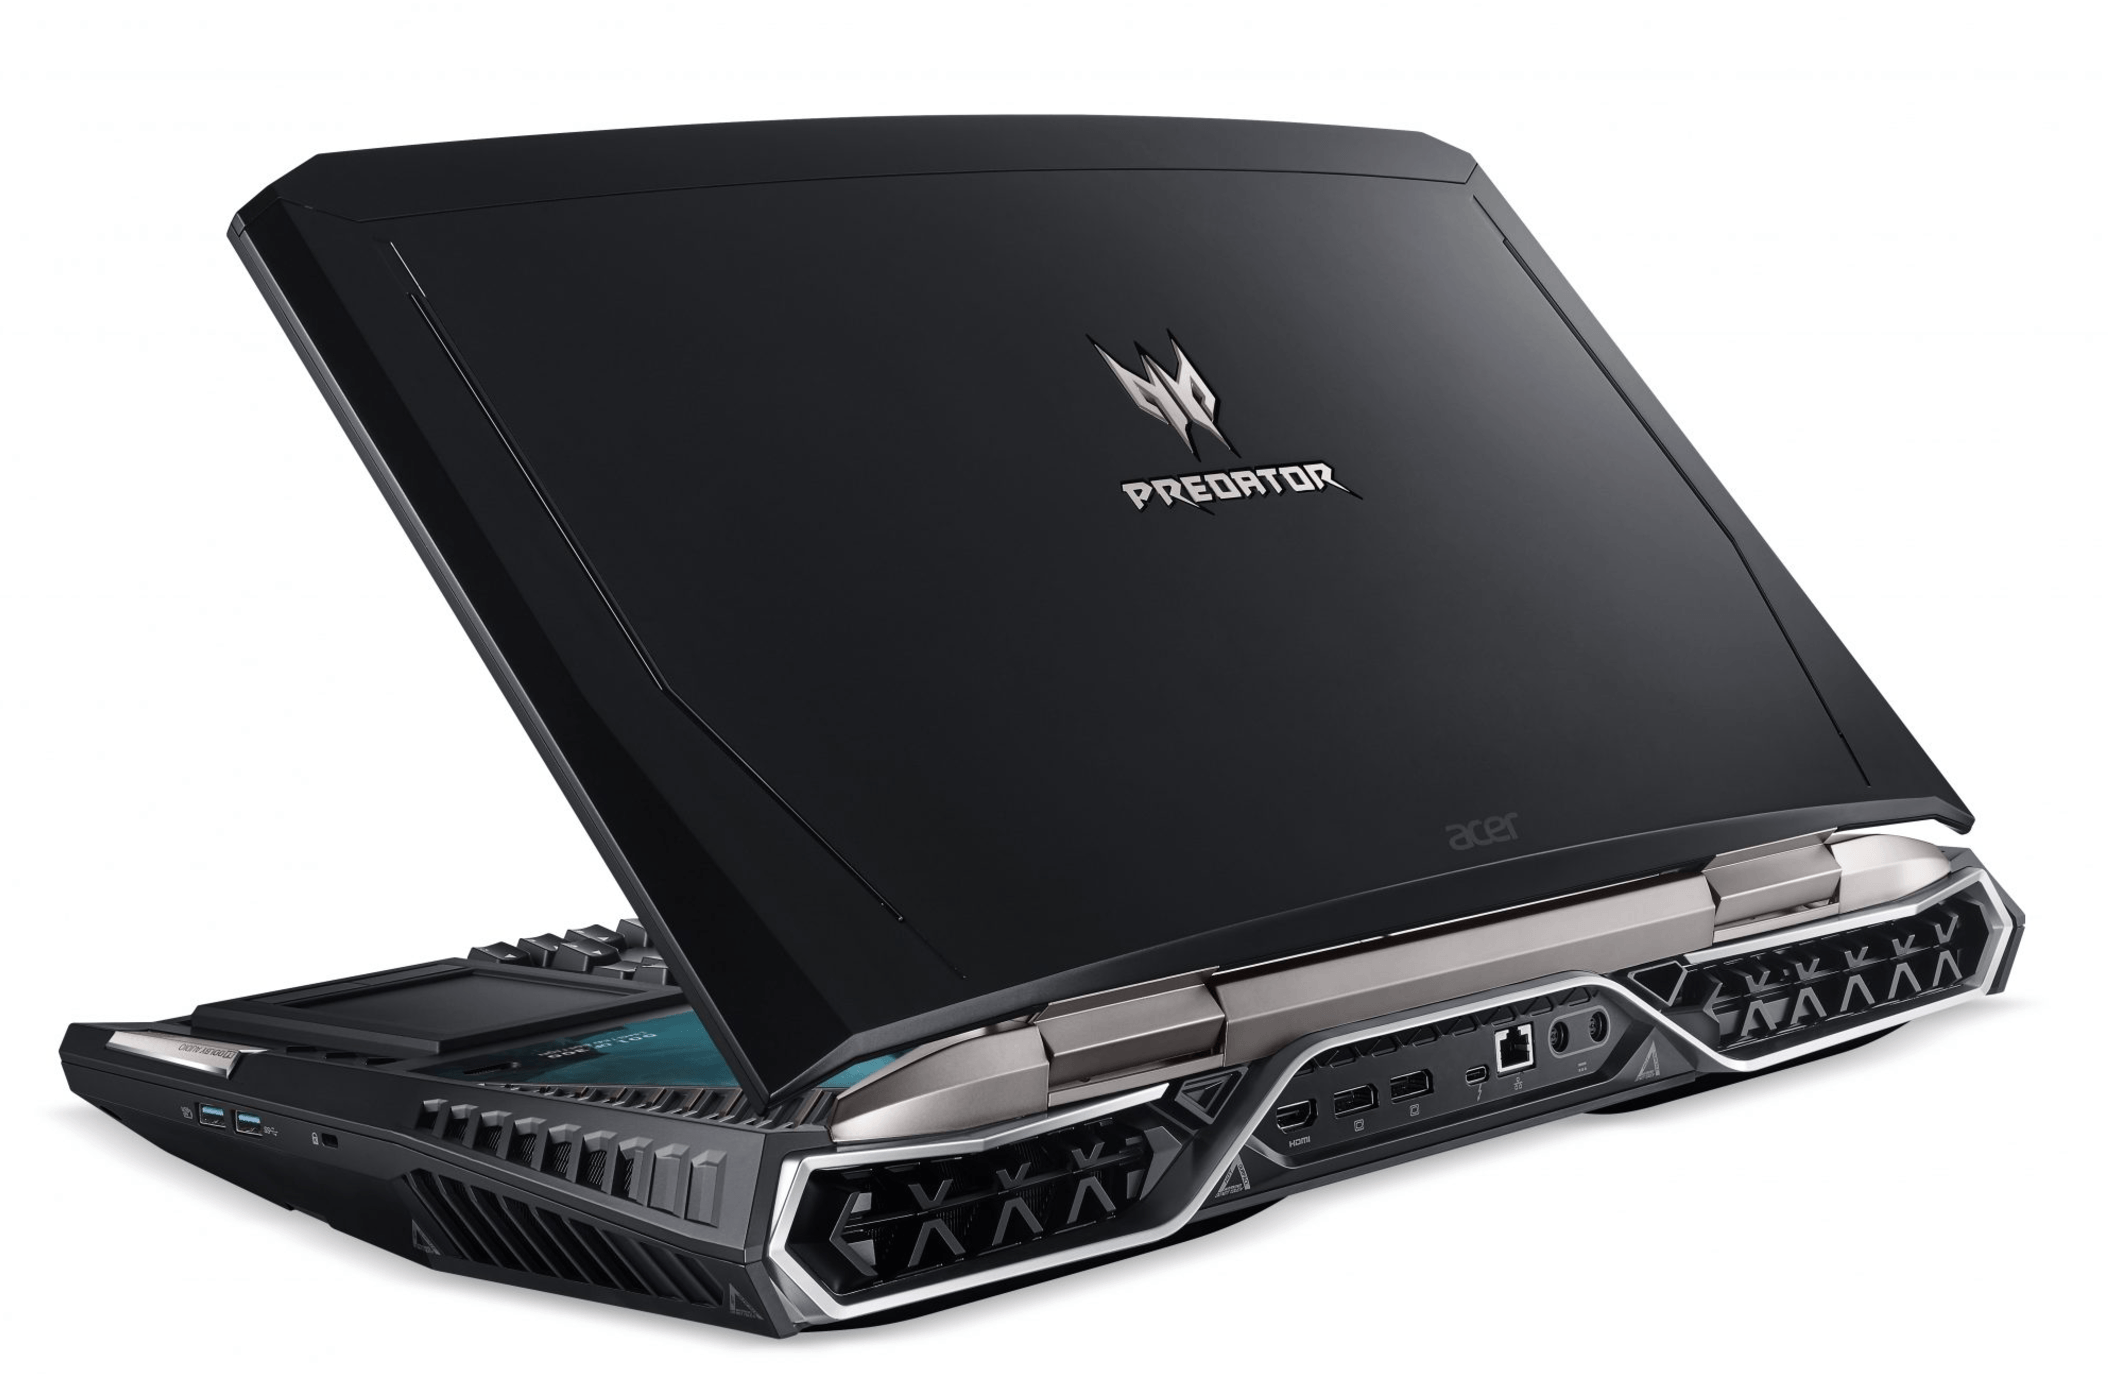 Need extra ports? Have fun lugging this beast around.